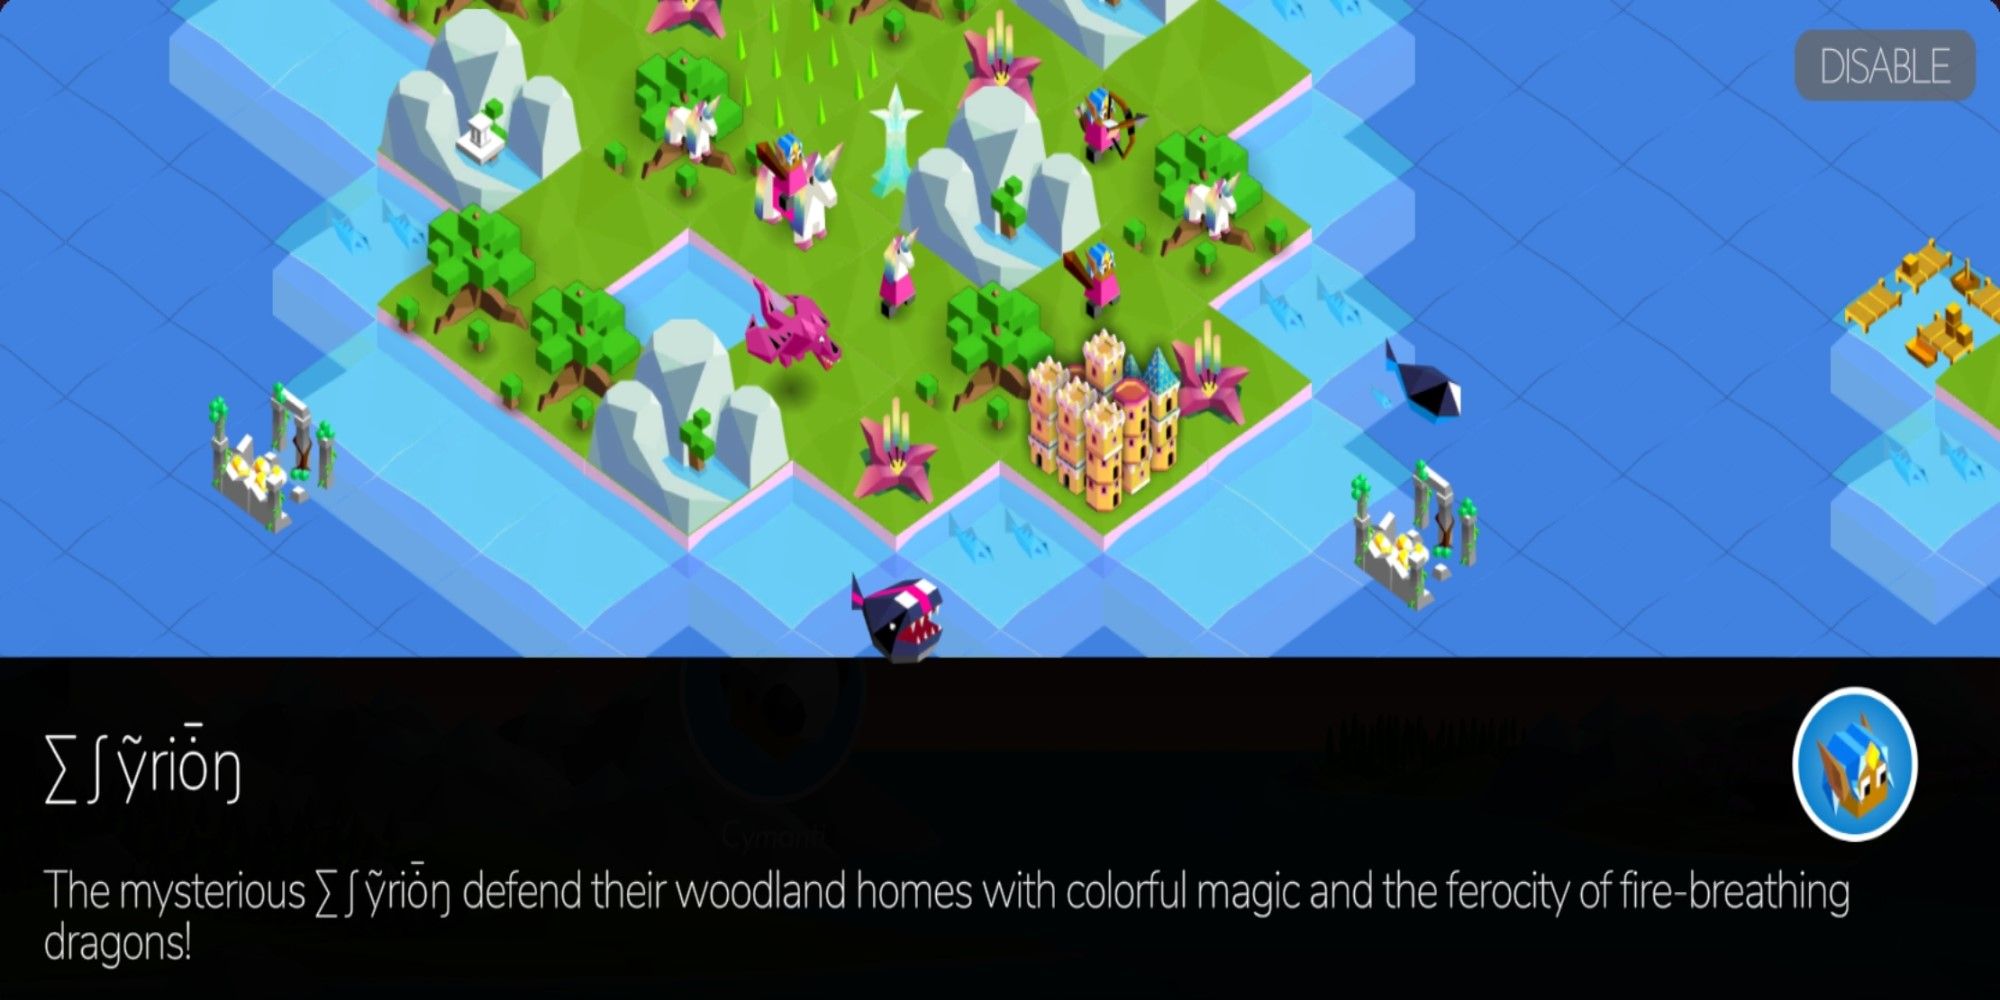 Information on the Elyrion Tribe from Battle of Polytopia.